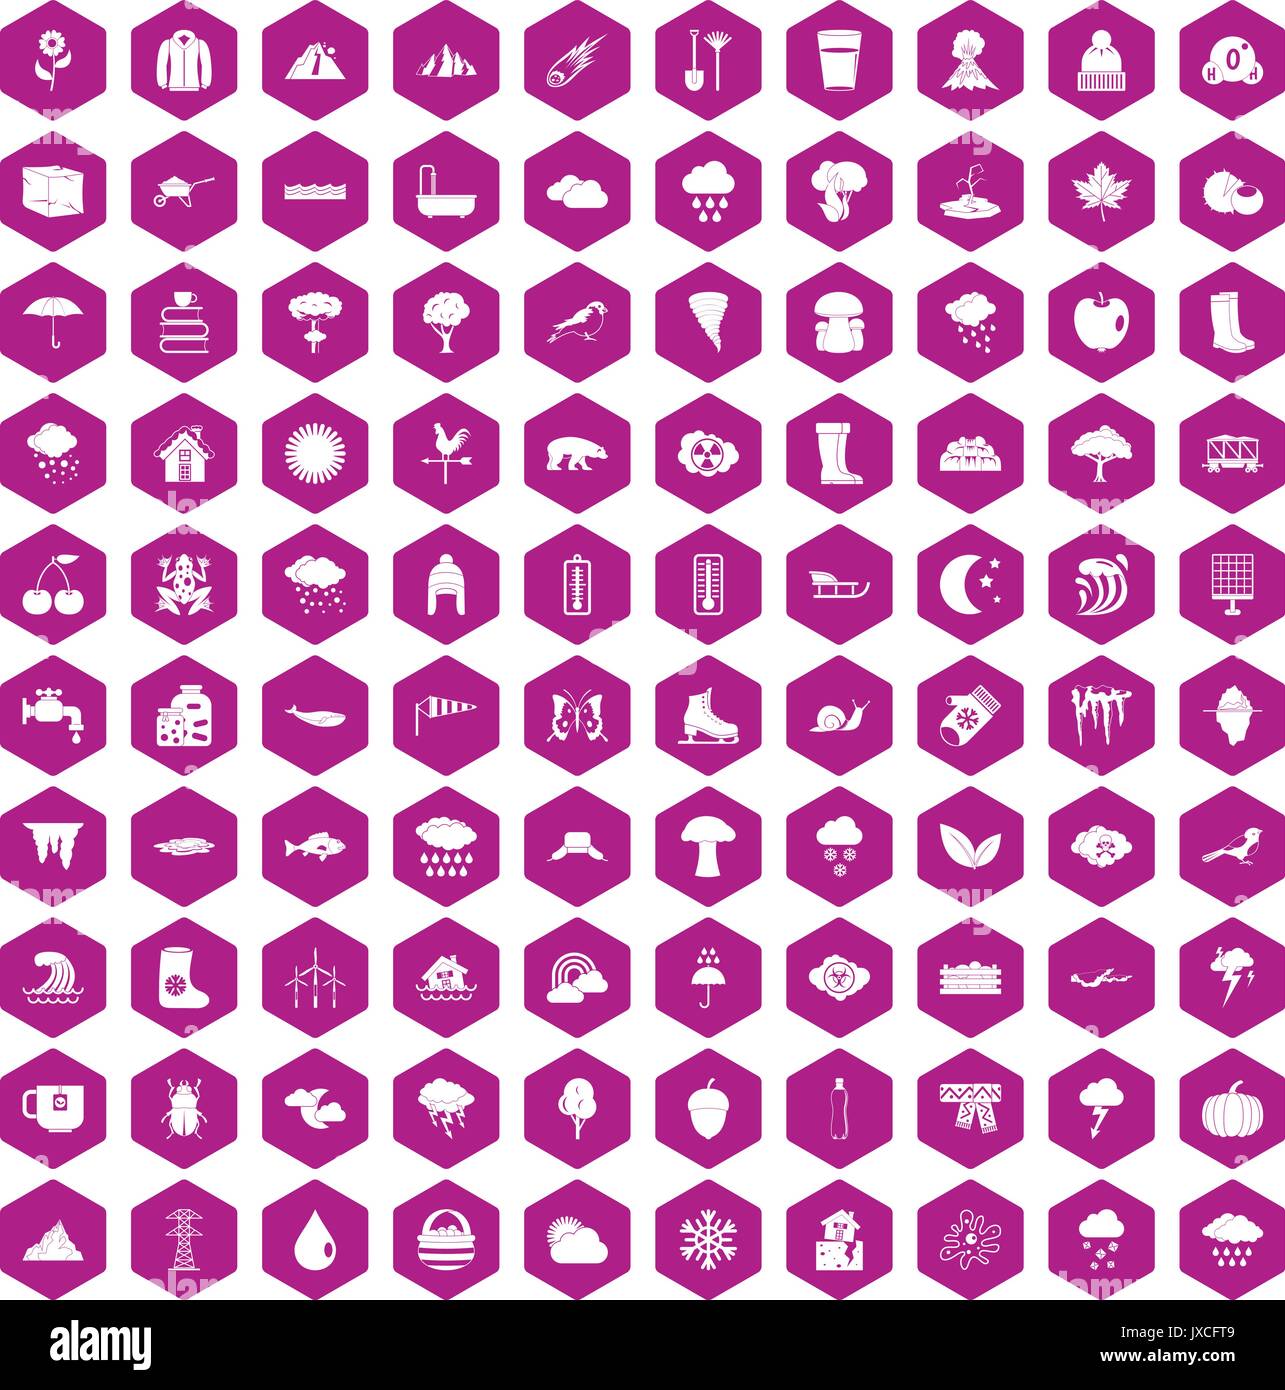 100 clouds icons hexagon violet Stock Vector